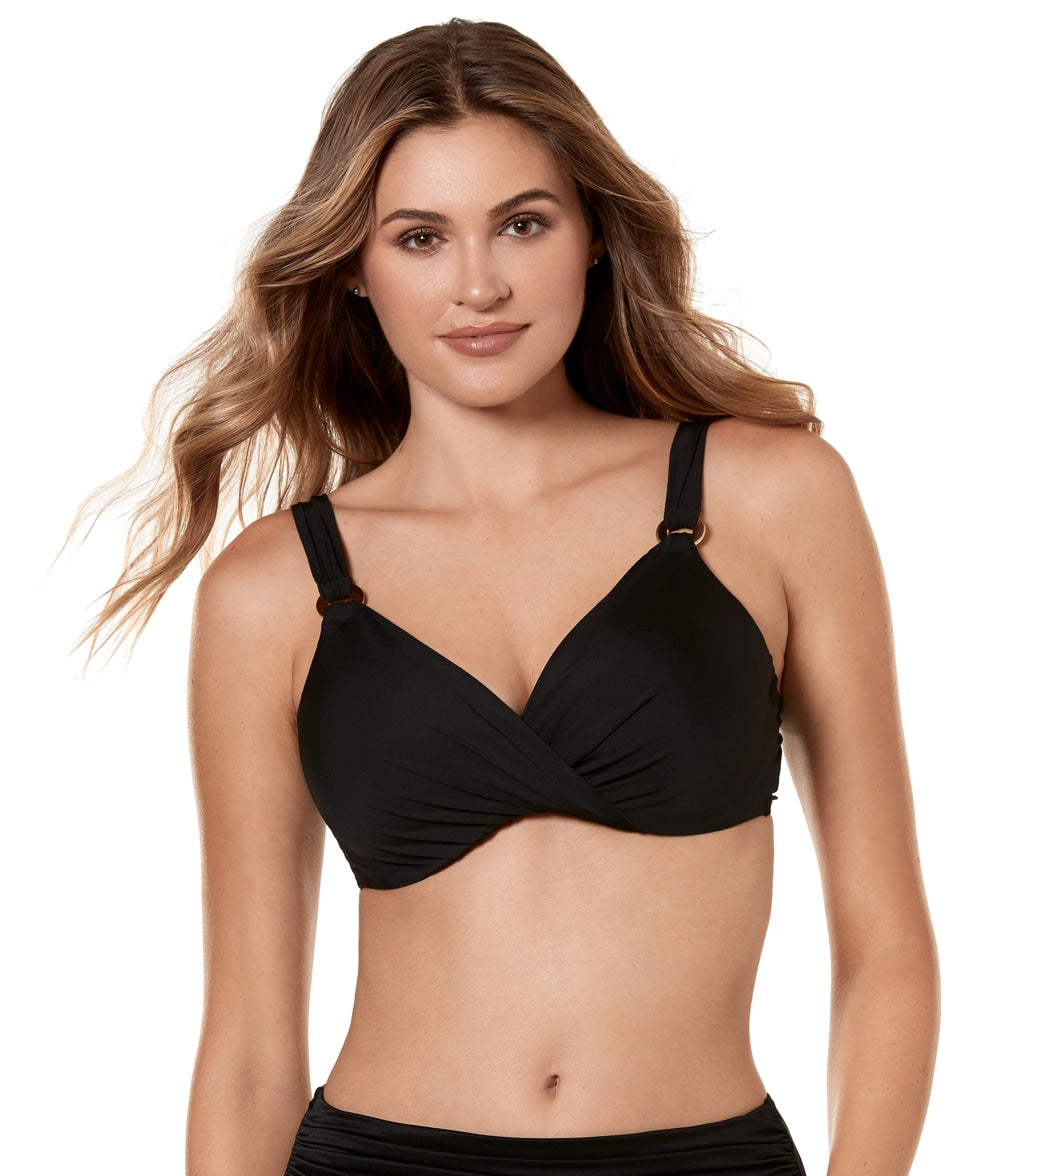 Swimwear :: Separates D Cup and DD Cup Underwire Tops - Sun City